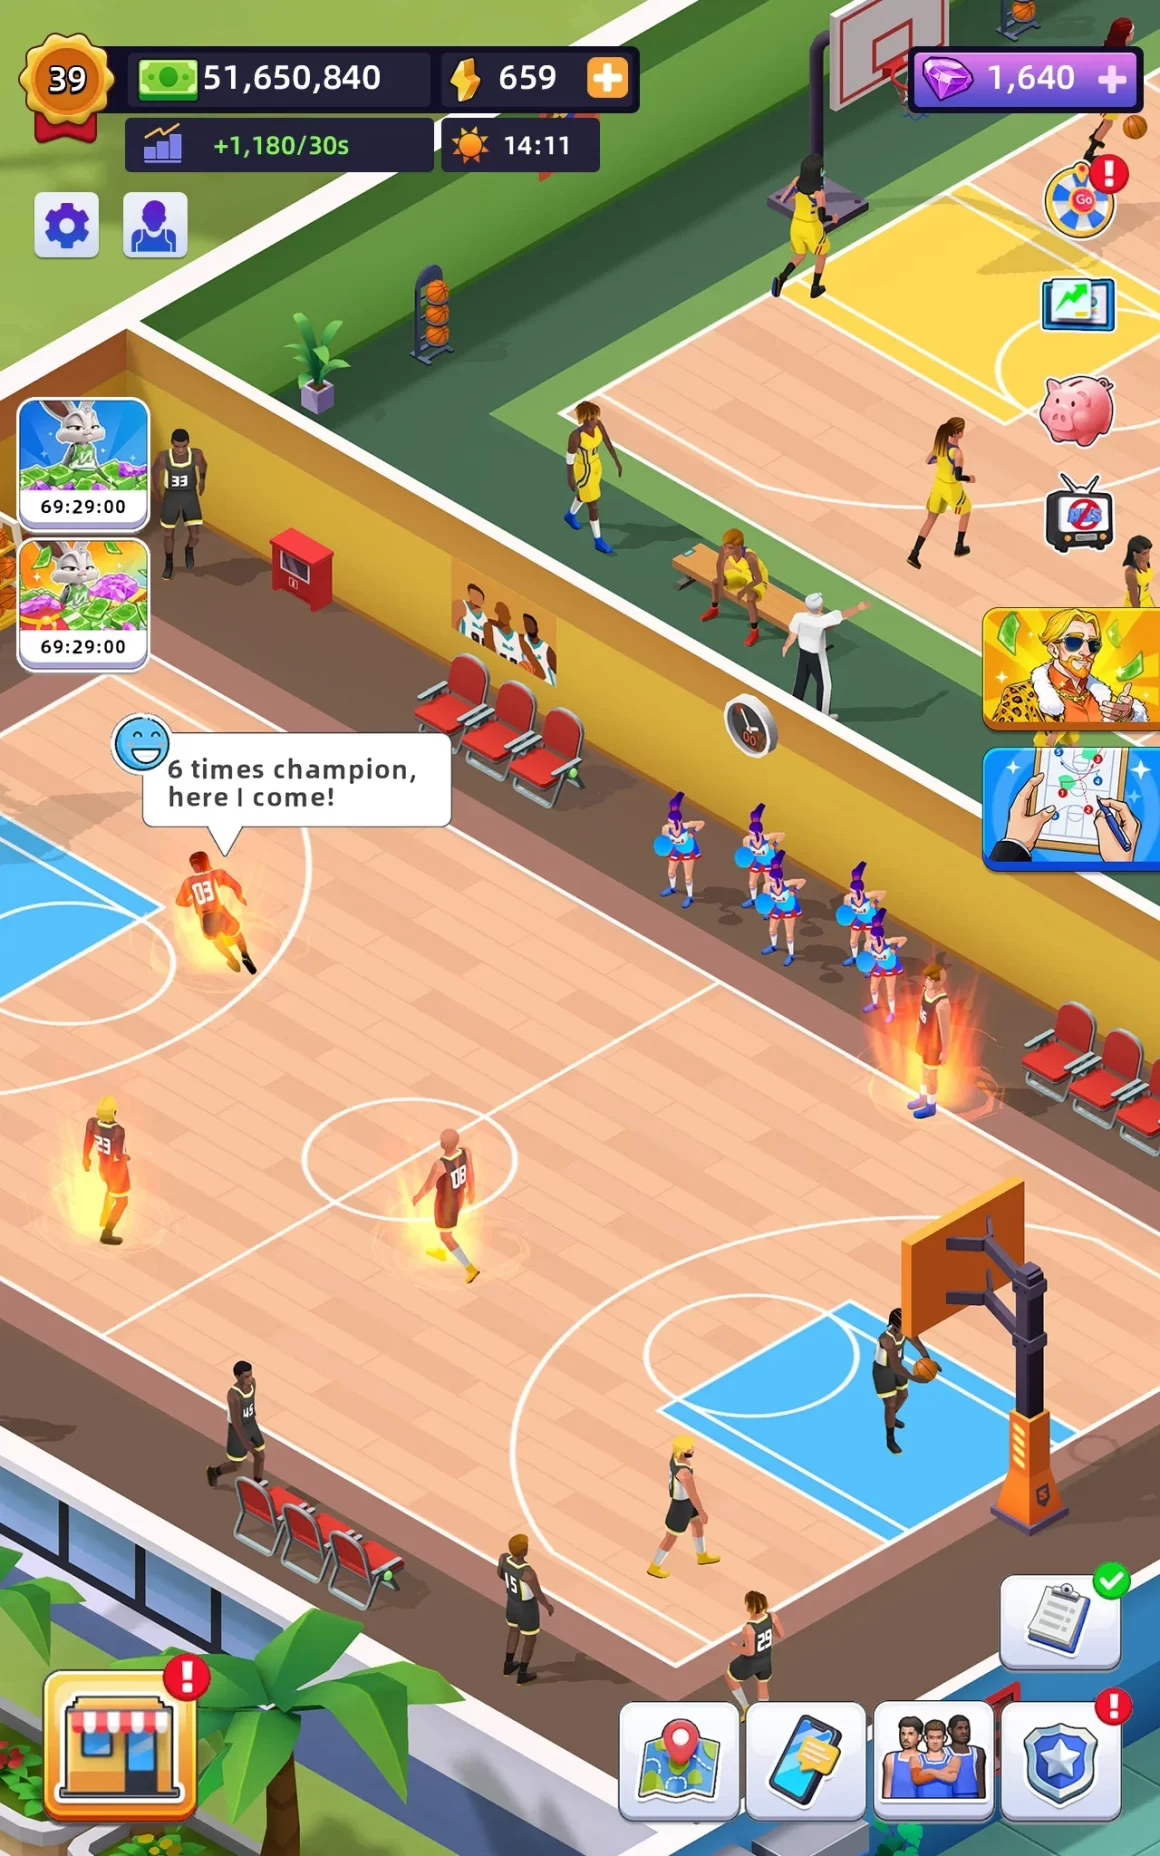 unnamed 25 3 1160x1856 - Idle Basketball Arena Tycoon Mod Apk V1.2.1 (Unlimited Money)